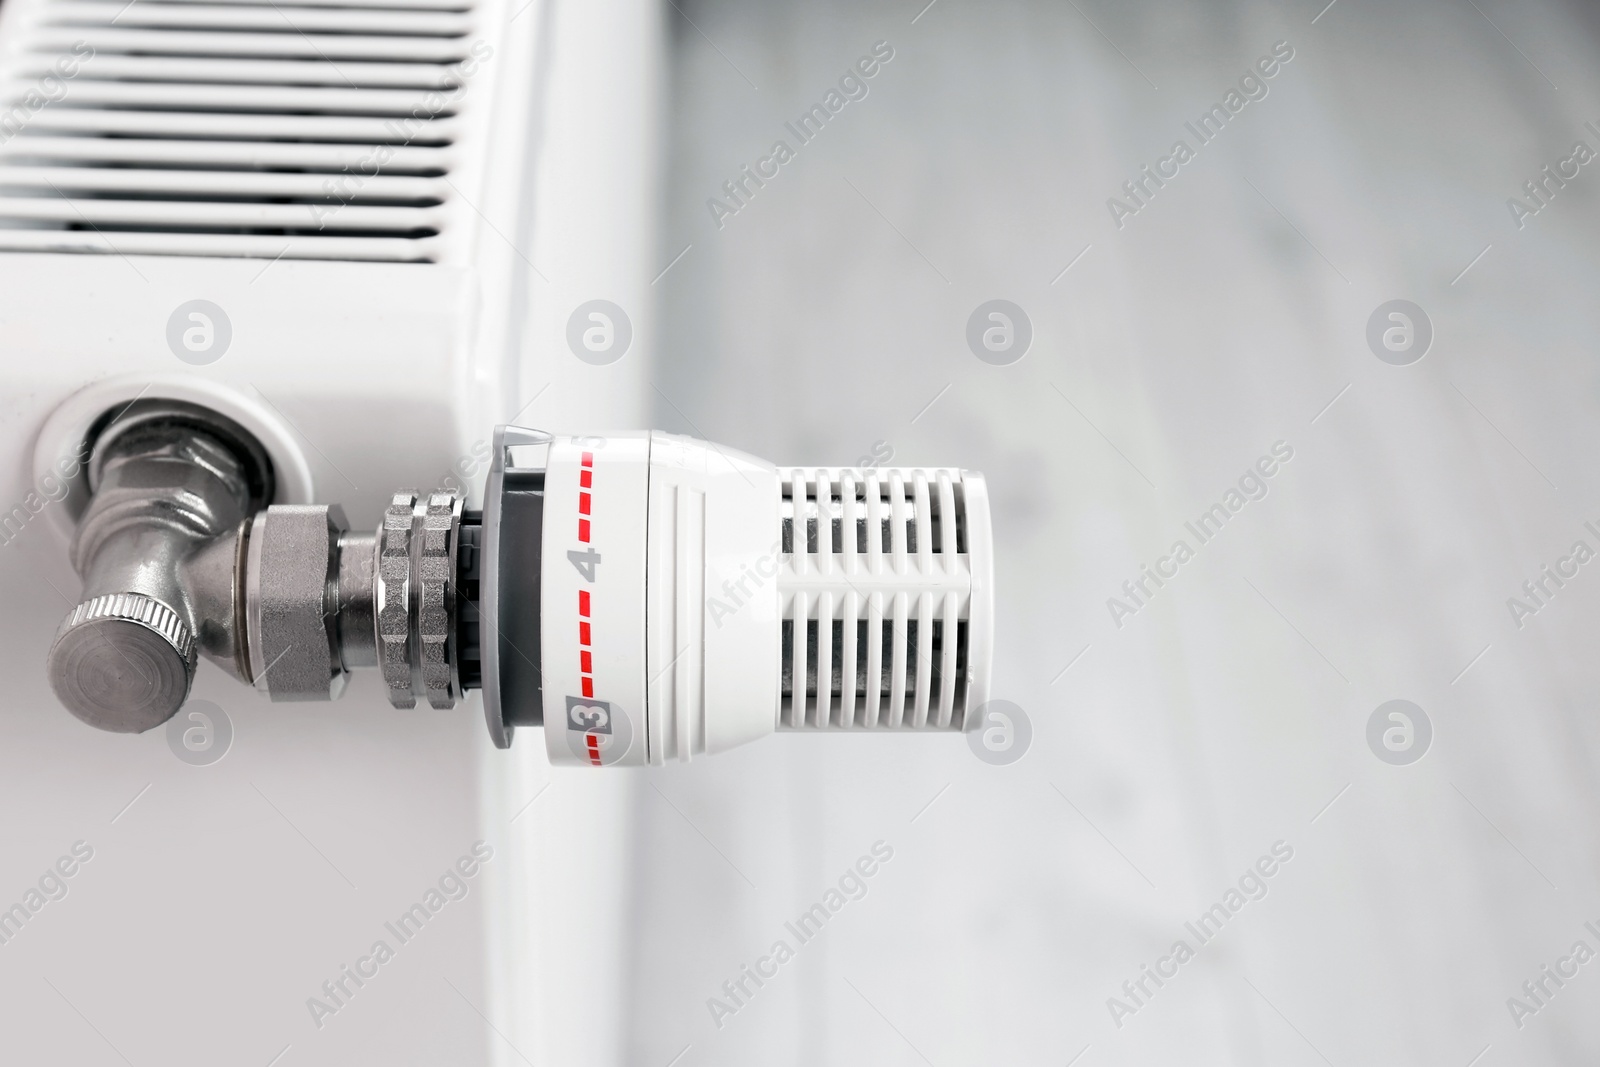 Photo of Heating radiator with manual thermostat, closeup view